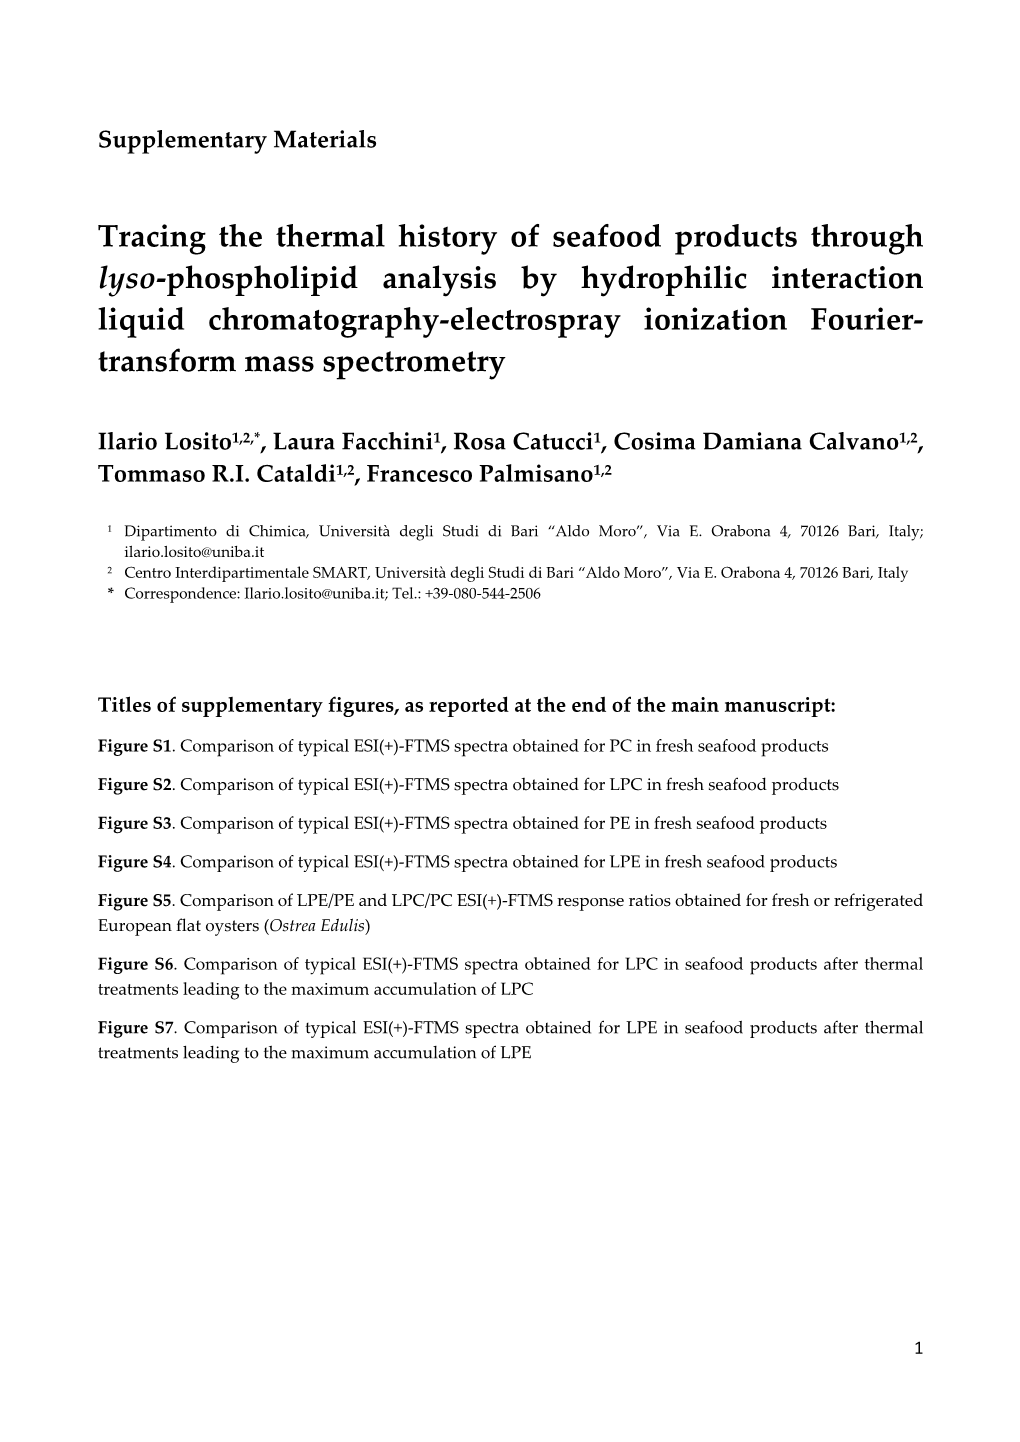 Tracing the Thermal History of Seafood Products Through Lyso-Phospholipid